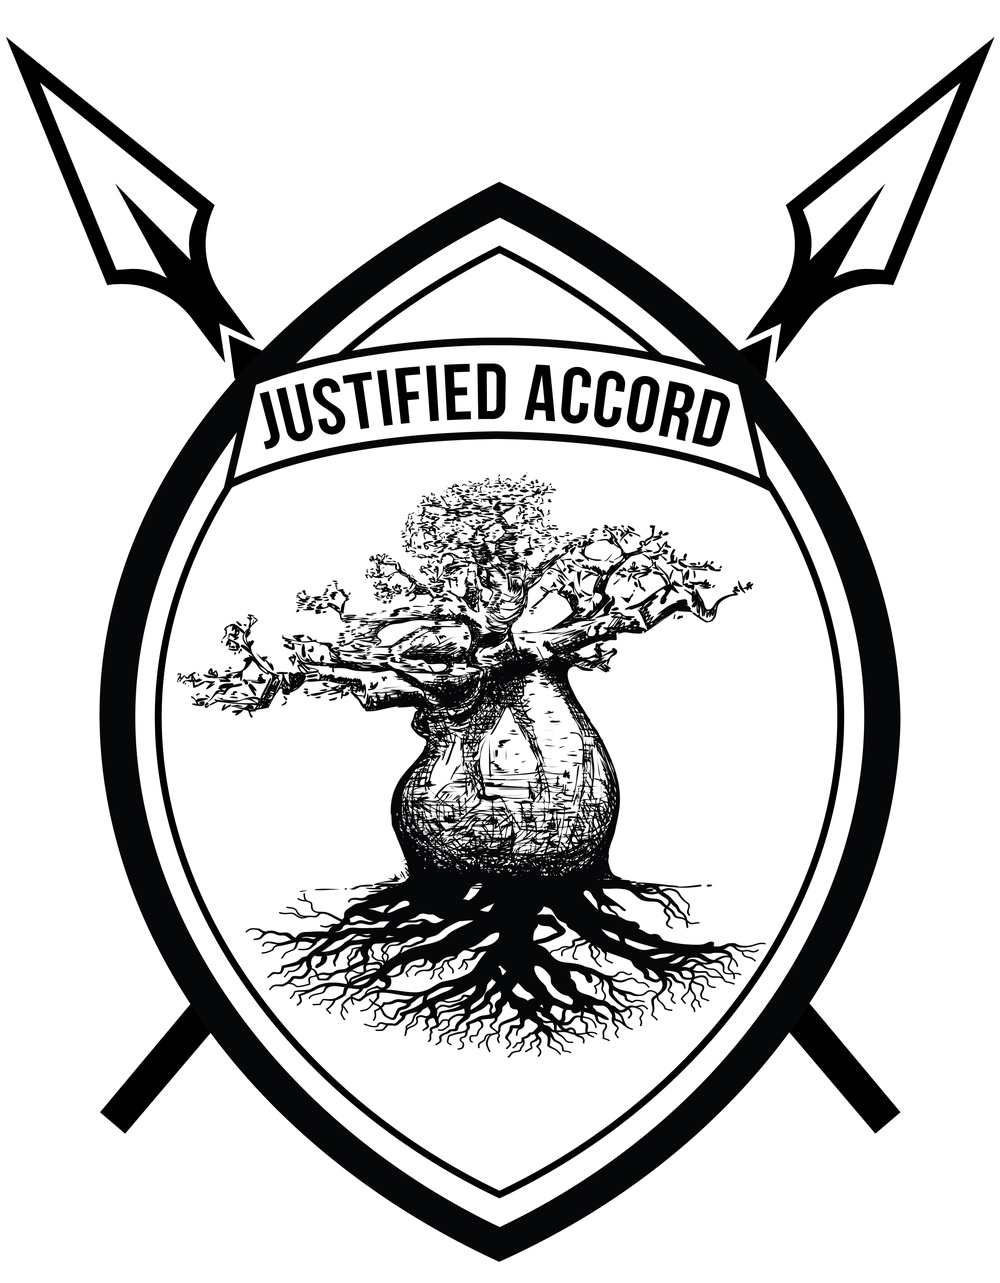 Justified Accord '22